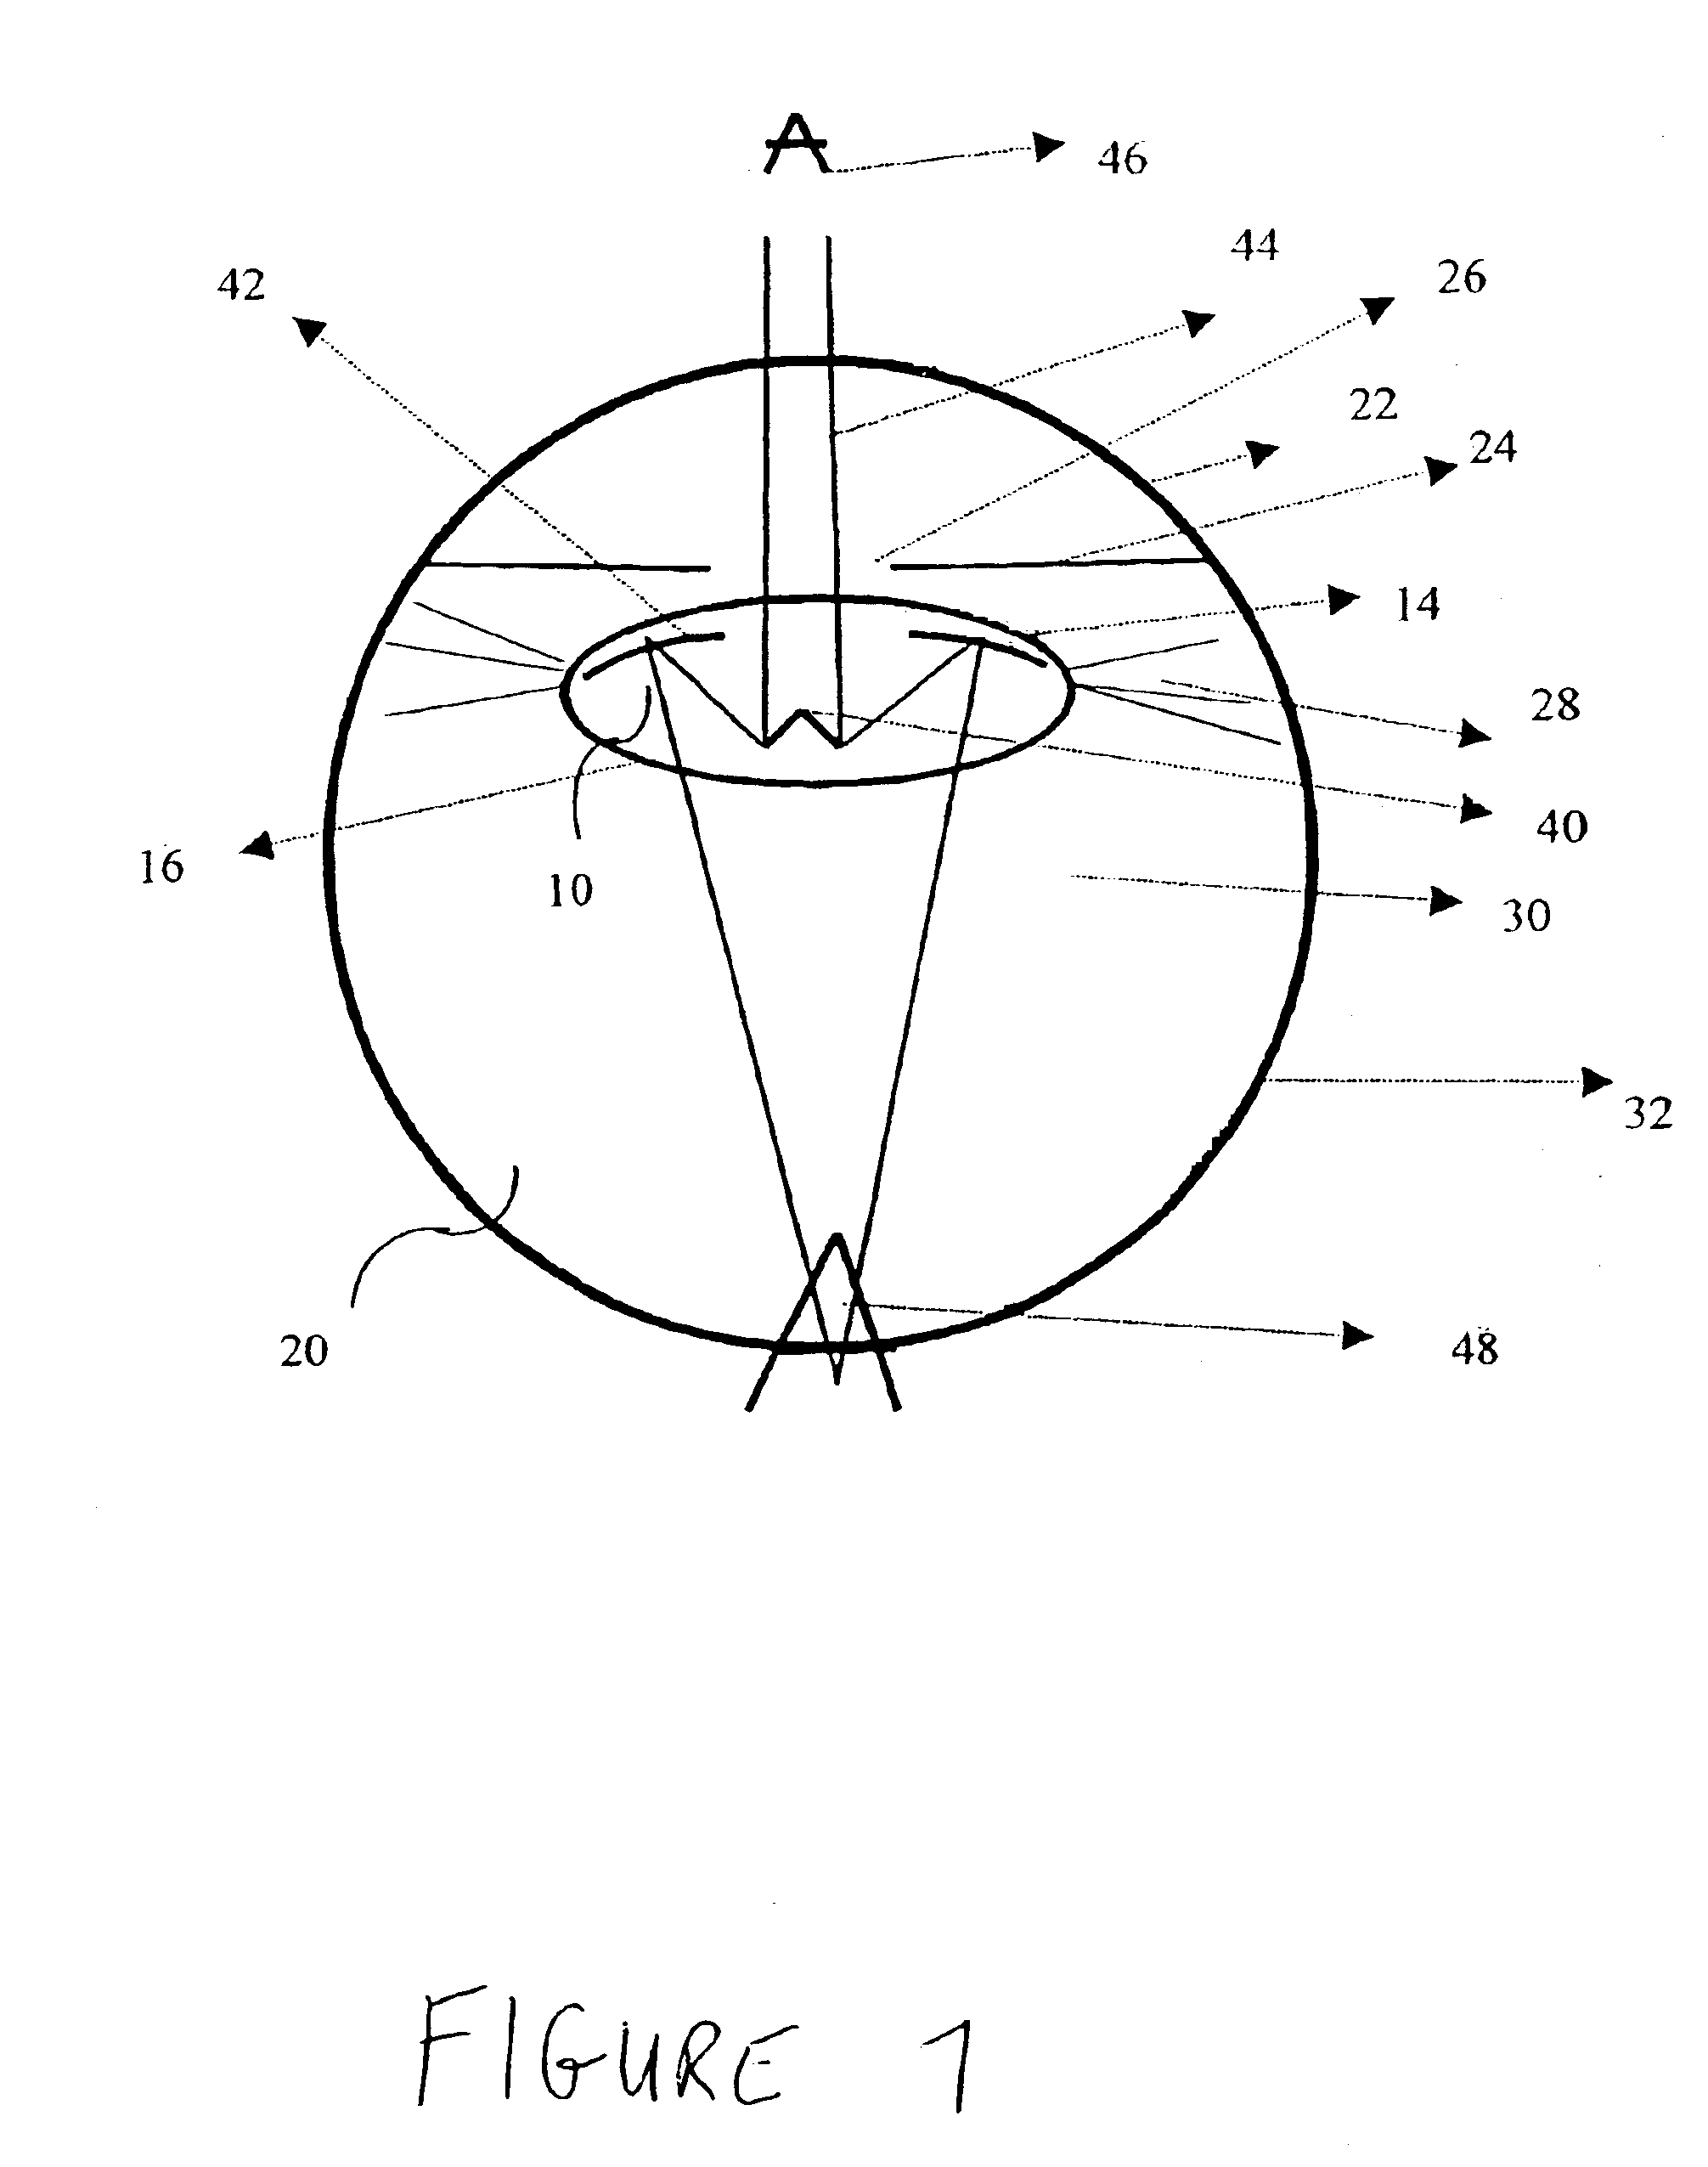 Intraocular lens implant with mirror